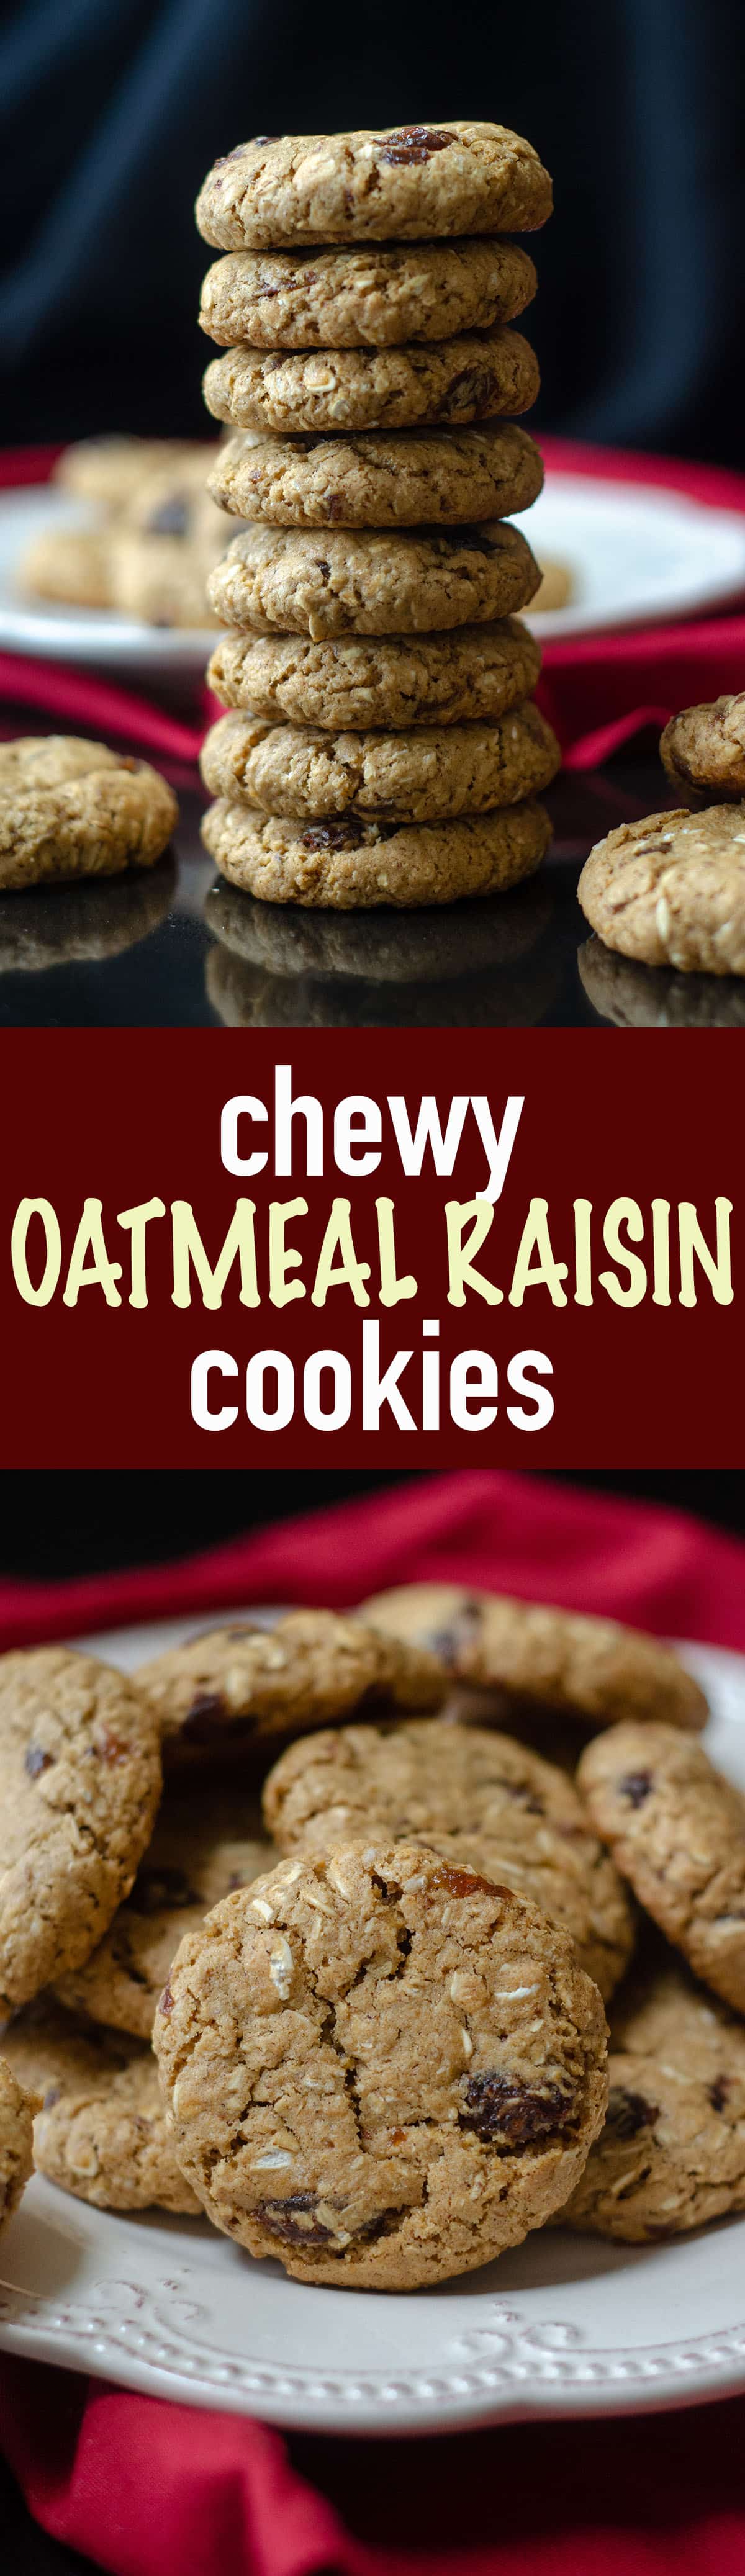 These oatmeal raisin cookies are chewy, buttery, and sweetened with brown sugar and molasses. via @frshaprilflours